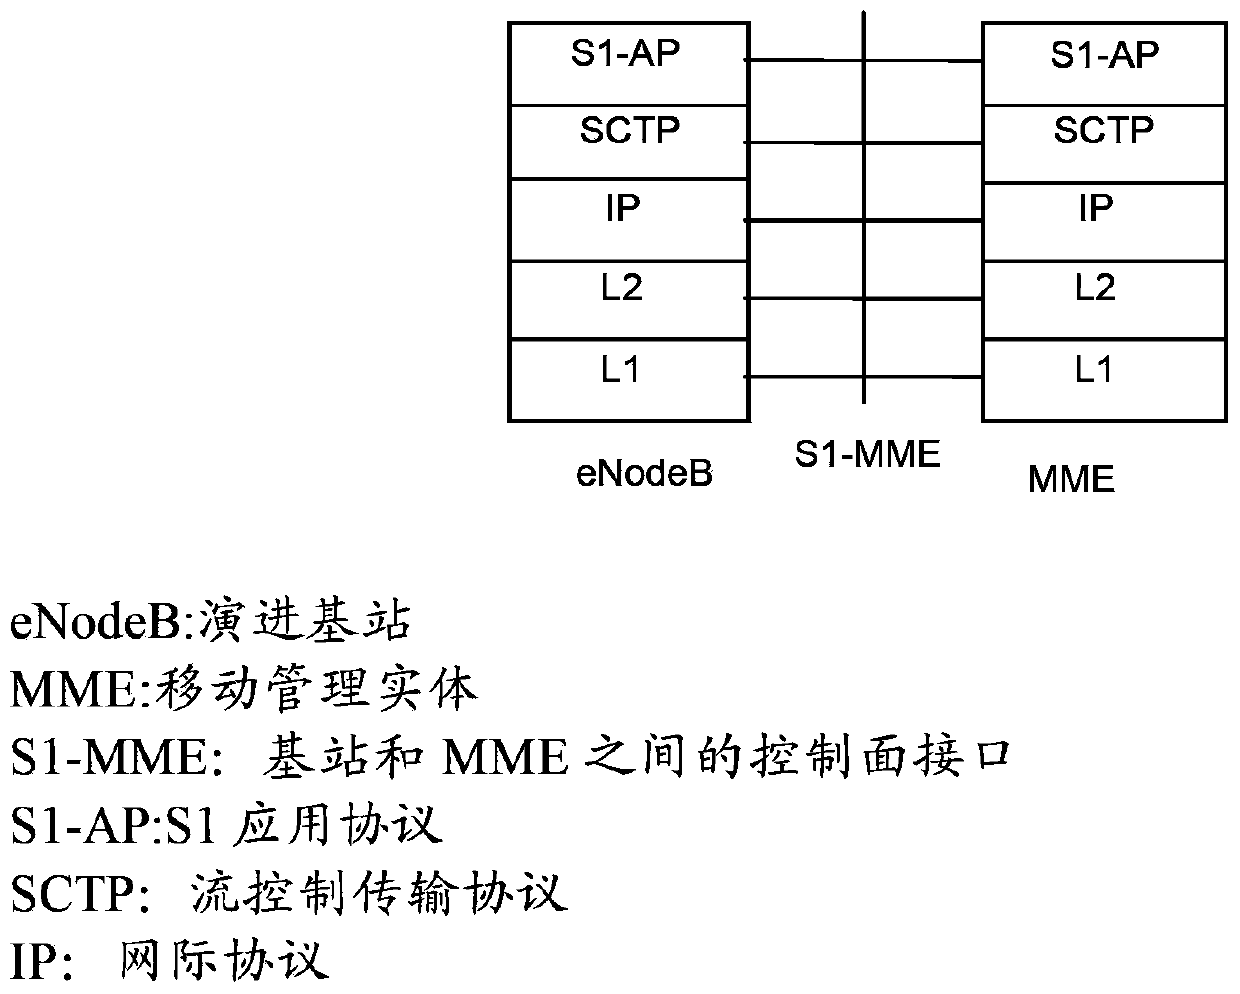 Method and device for processing SCTP (stream control transmission protocol) link failure of an S1 interface